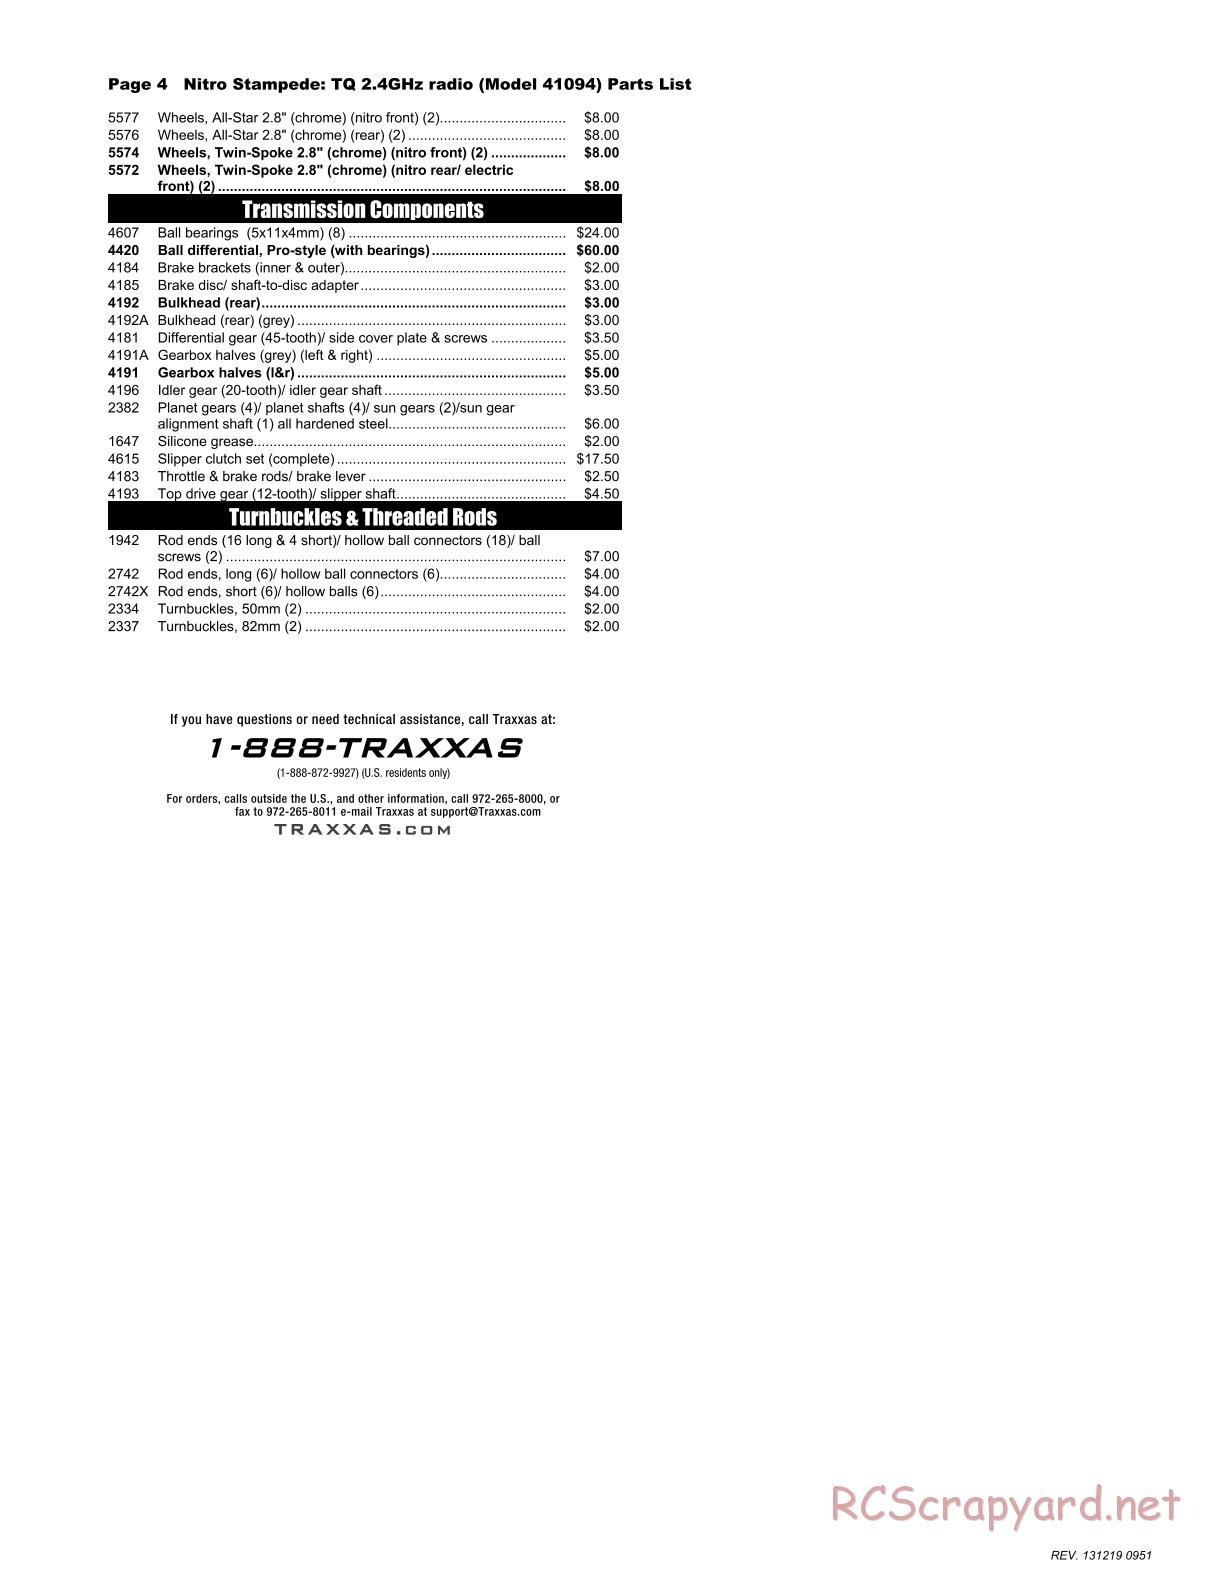 Traxxas - Nitro Stampede (2013) - Parts List - Page 4